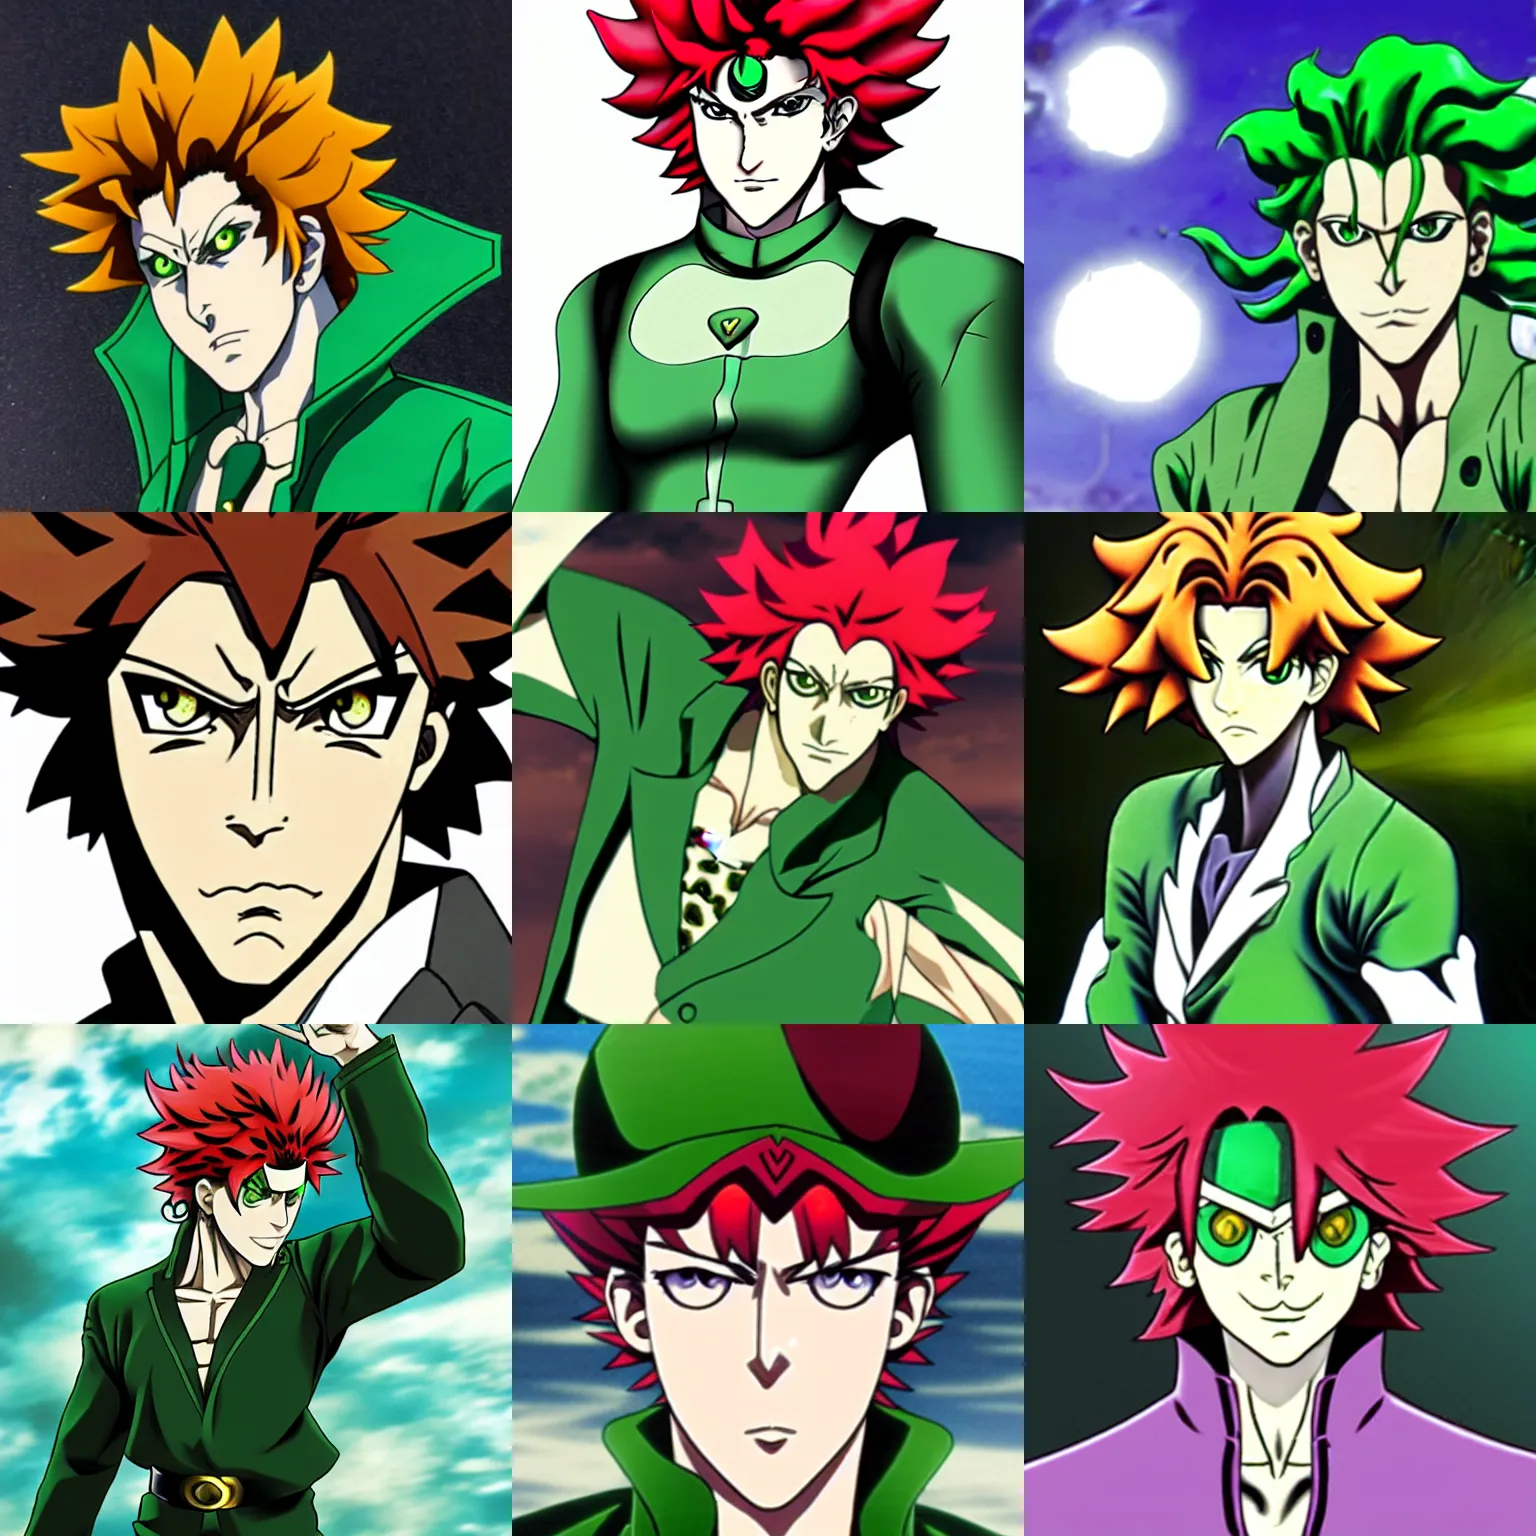 Prompt: kakyoin from stardust crusaders